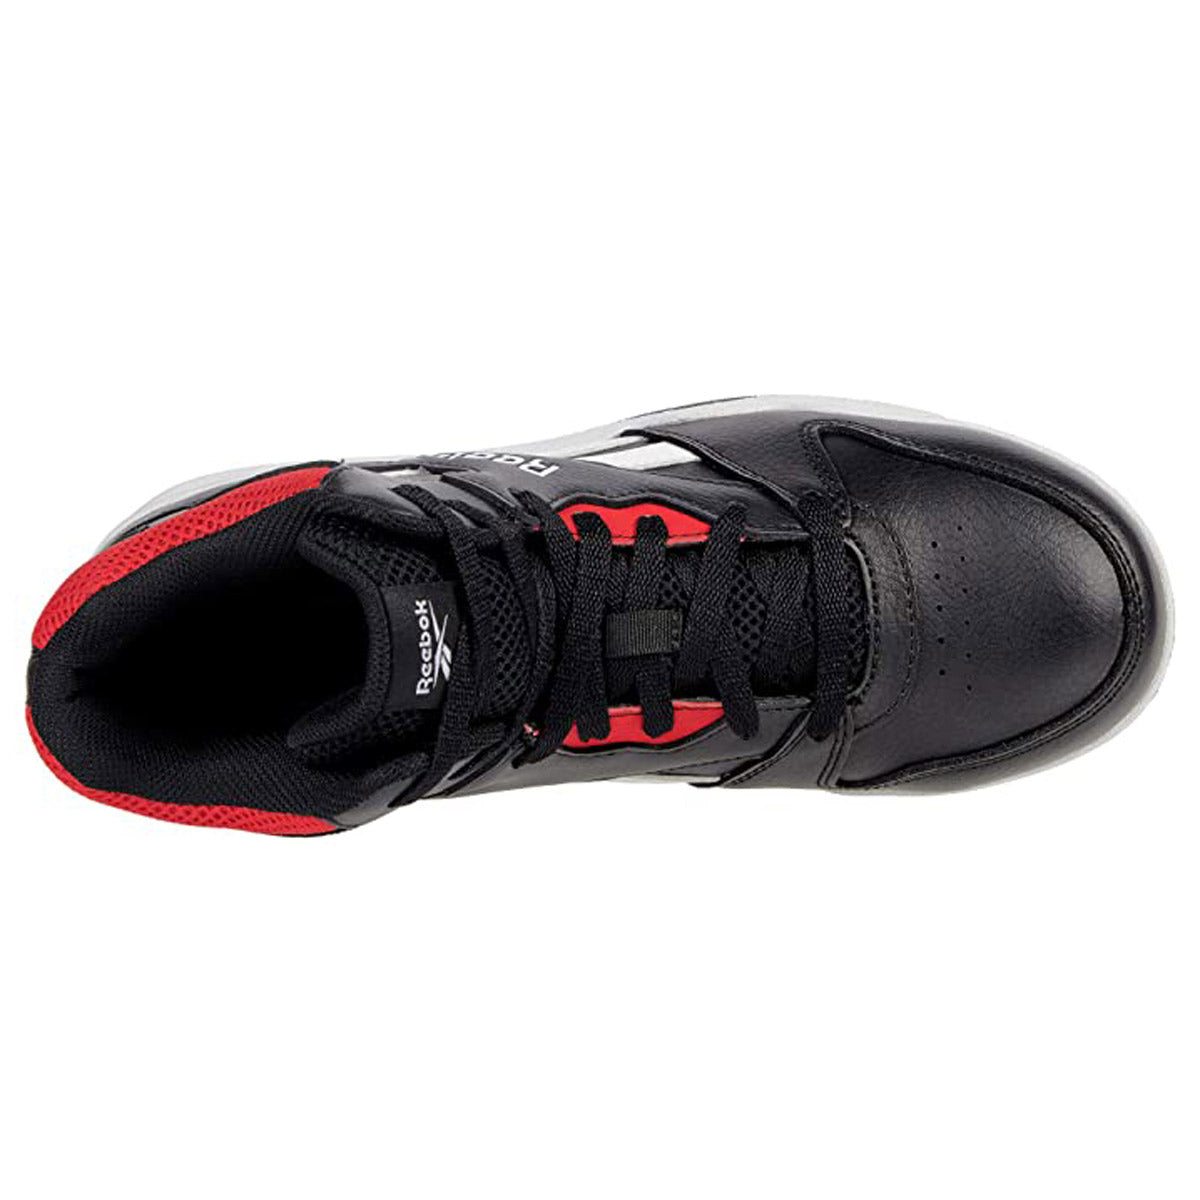 Top view of a black and red Reebok Work Composite Toe BB4500 Mid sneaker.